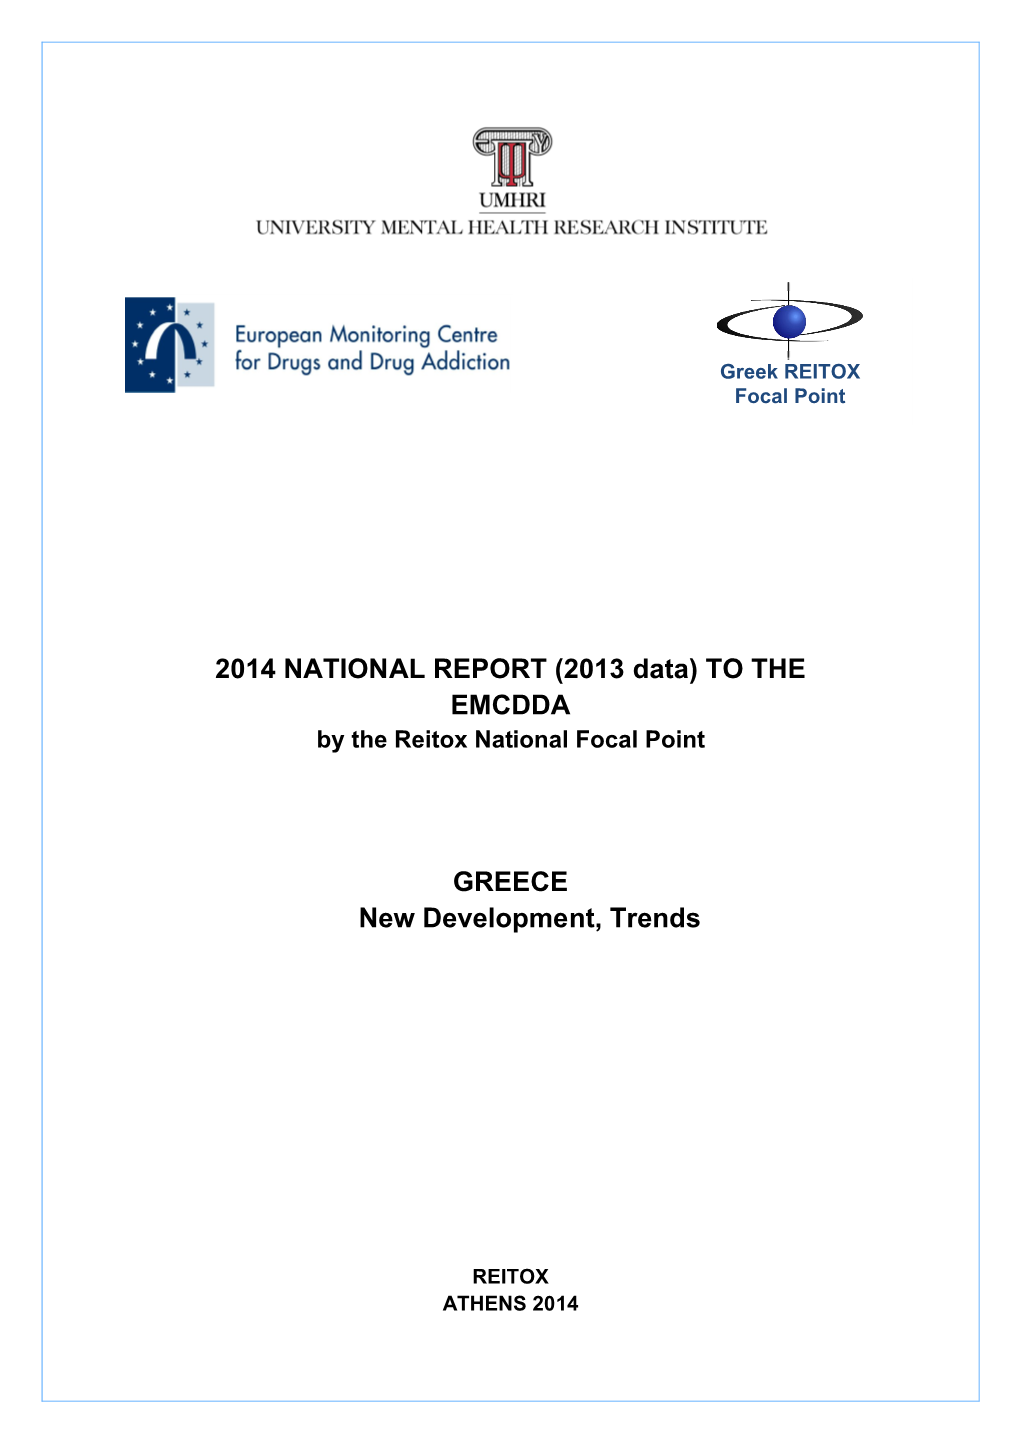 2014 NATIONAL REPORT (2013 Data) to the EMCDDA GREECE